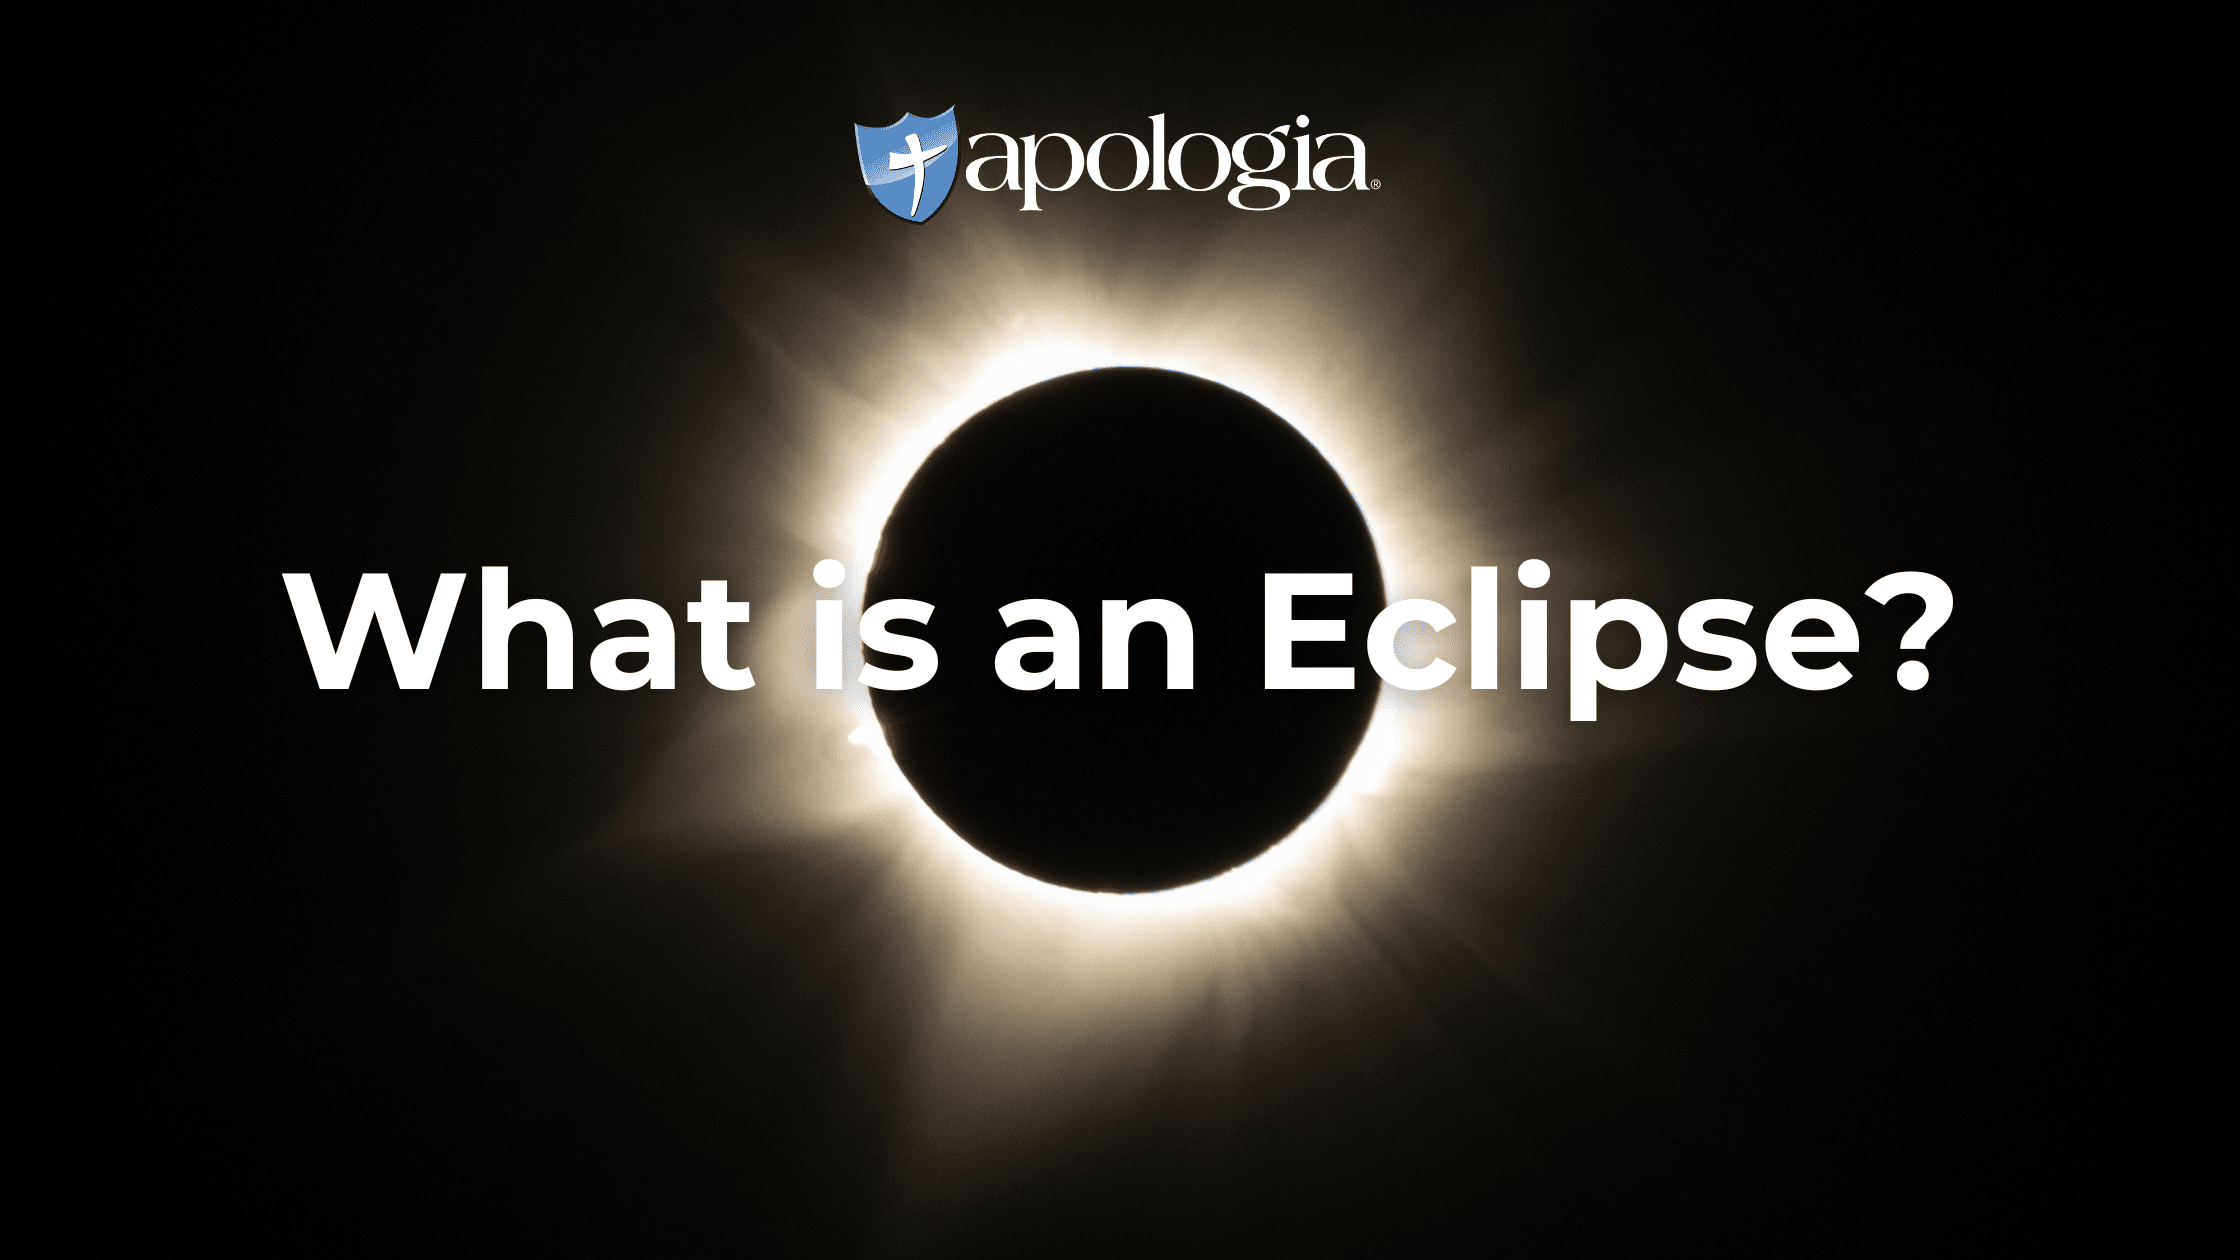 What is an Eclipse?